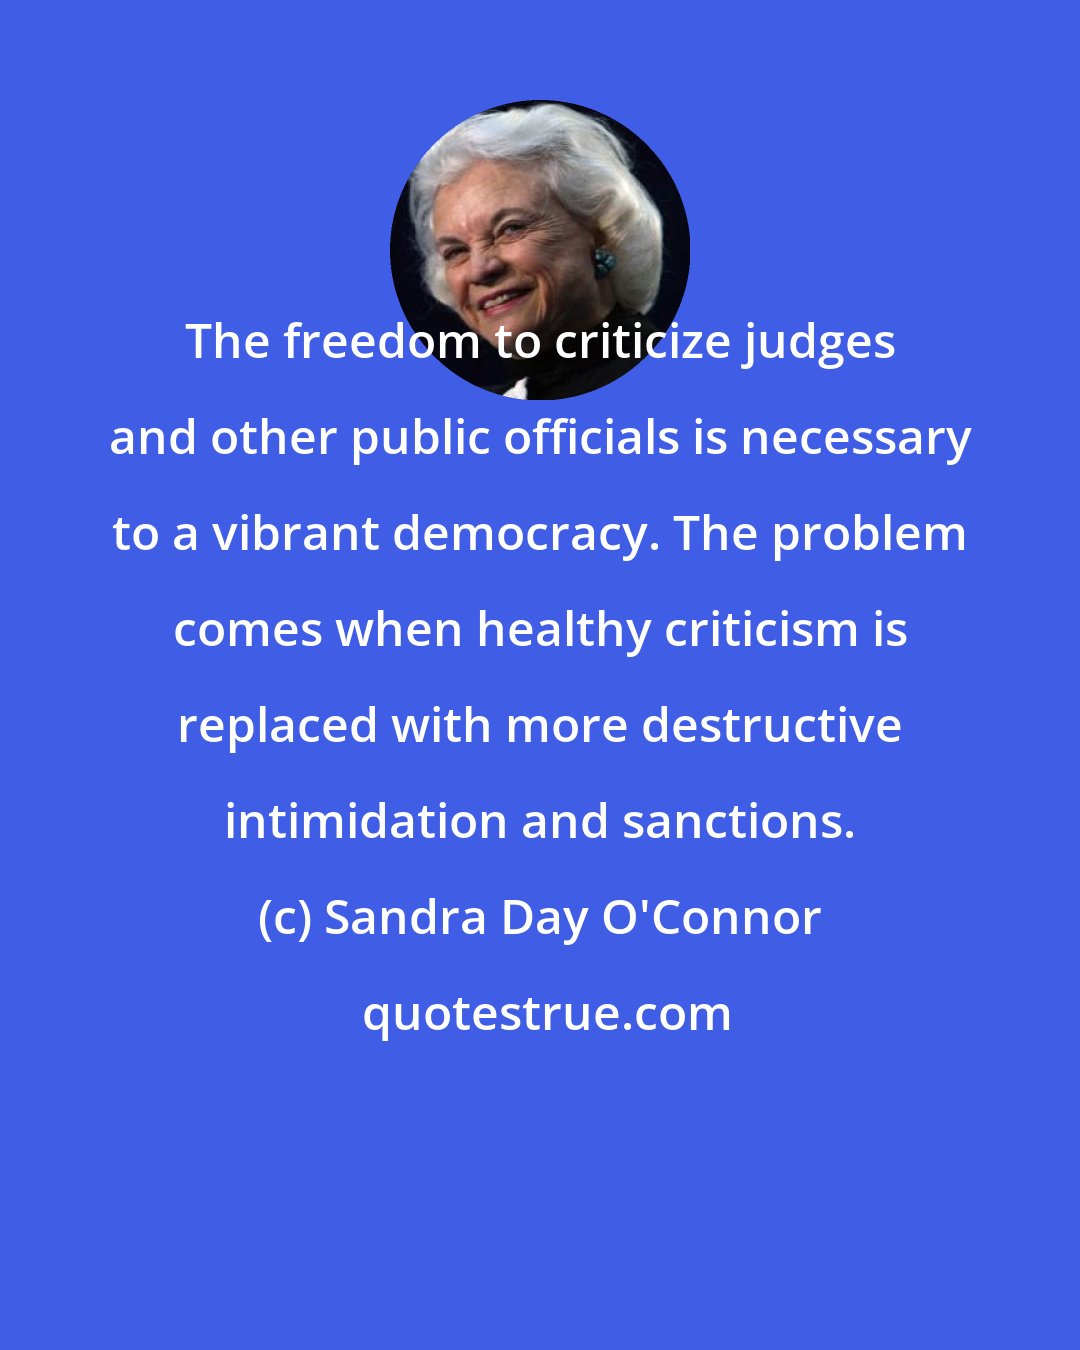 Sandra Day O'Connor: The freedom to criticize judges and other public officials is necessary to a vibrant democracy. The problem comes when healthy criticism is replaced with more destructive intimidation and sanctions.